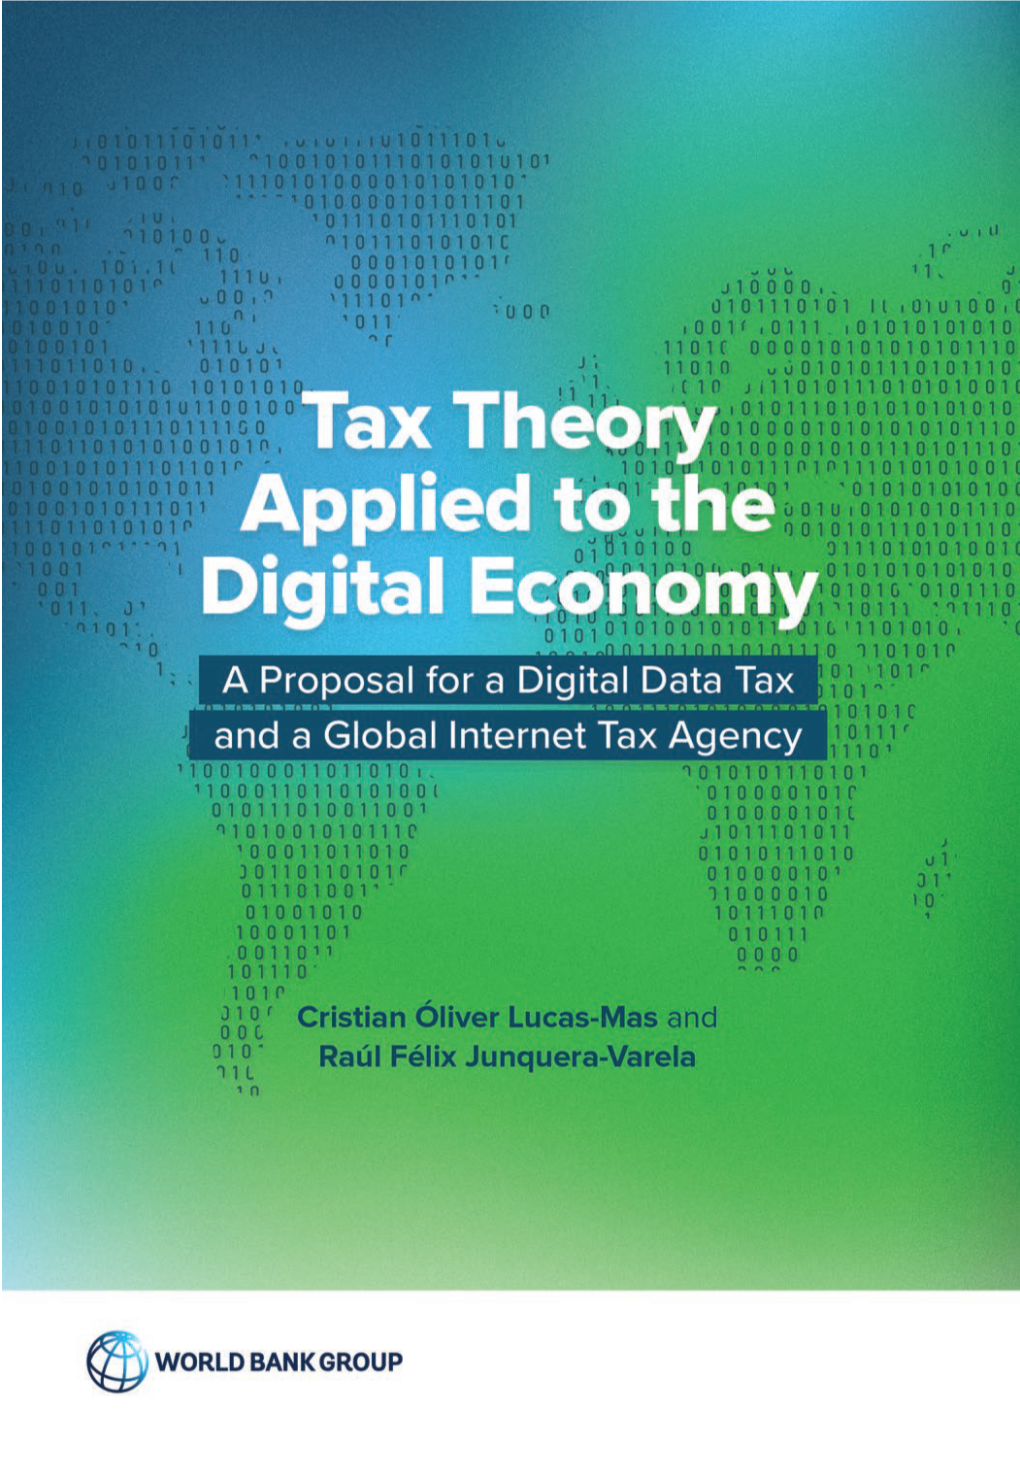 Tax Theory Applied to the Digital Economy: a Proposal for a Digital Data Tax and a Global Internet Tax Agency